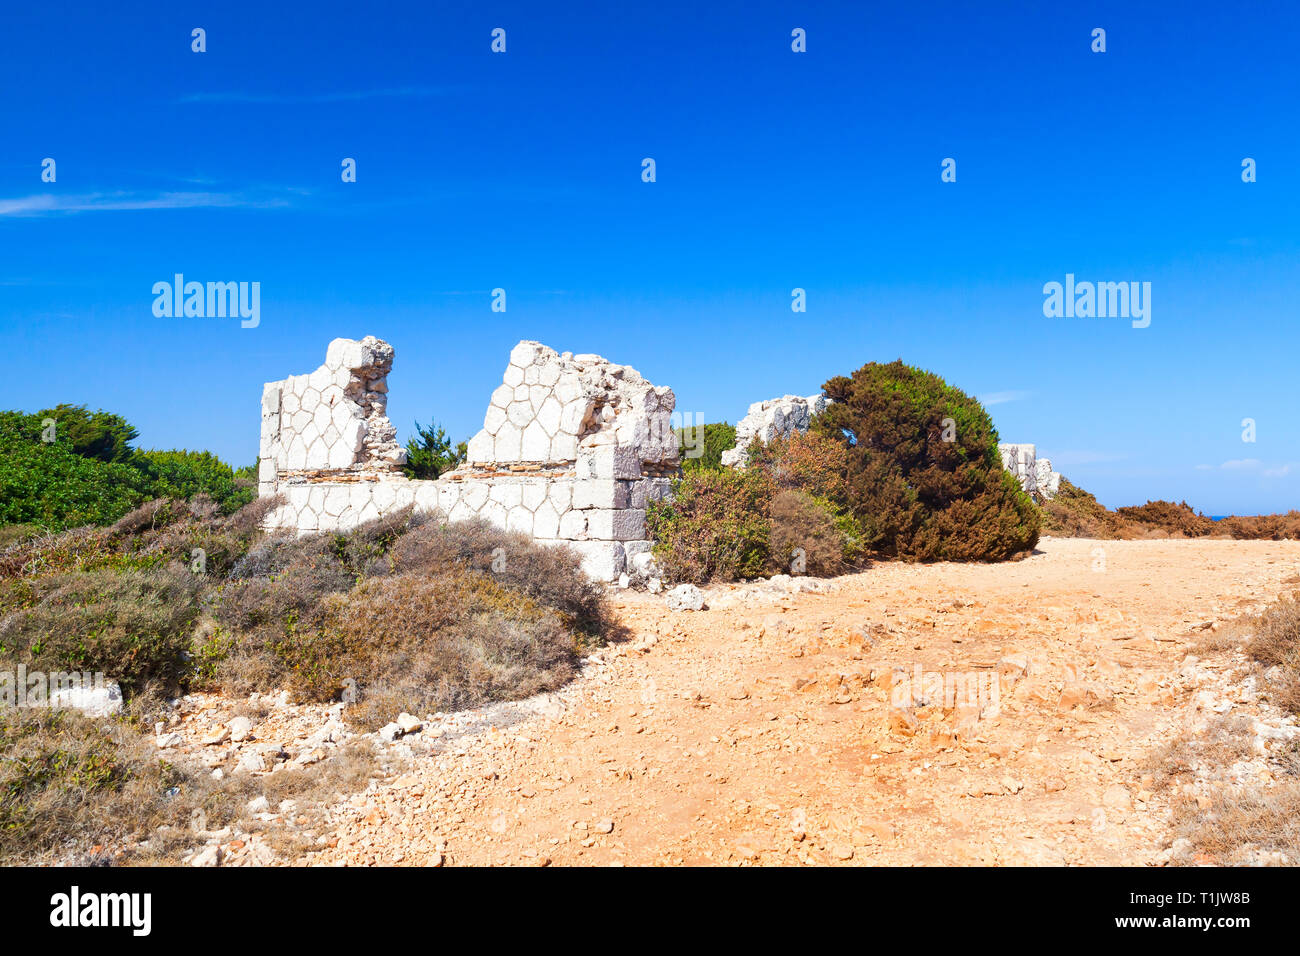 Summer rural landscape with ruins of ancient white stone house. Zakynthos, Greek island in the Ionian Sea Stock Photo